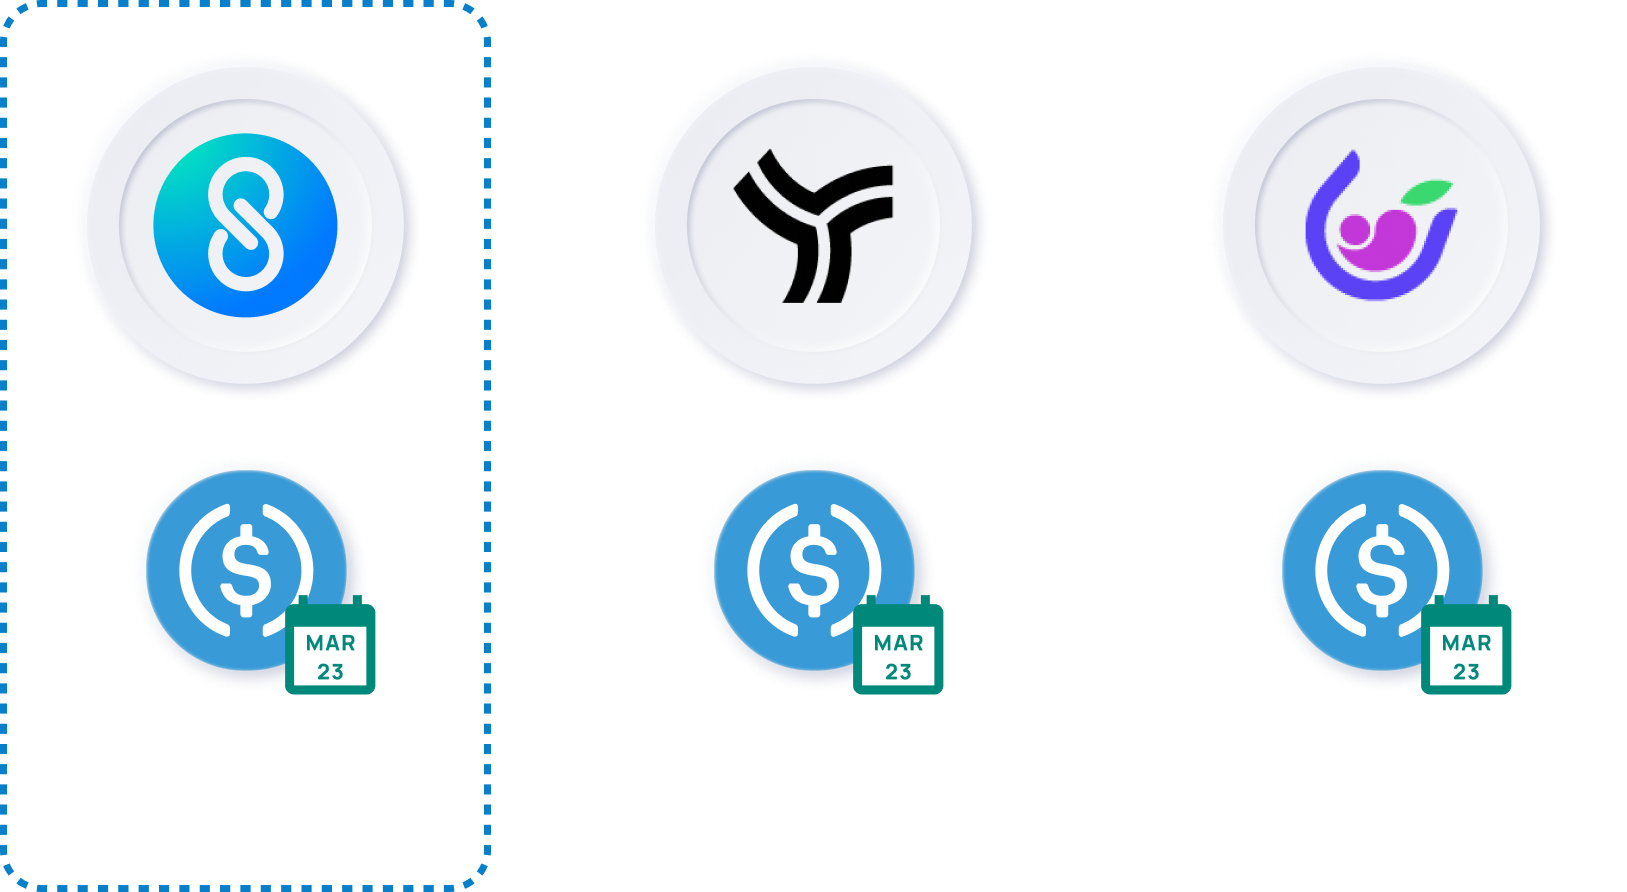 Graphic showing 3 protocols with different Principal Token prices and a highlight around the lowest priced one.